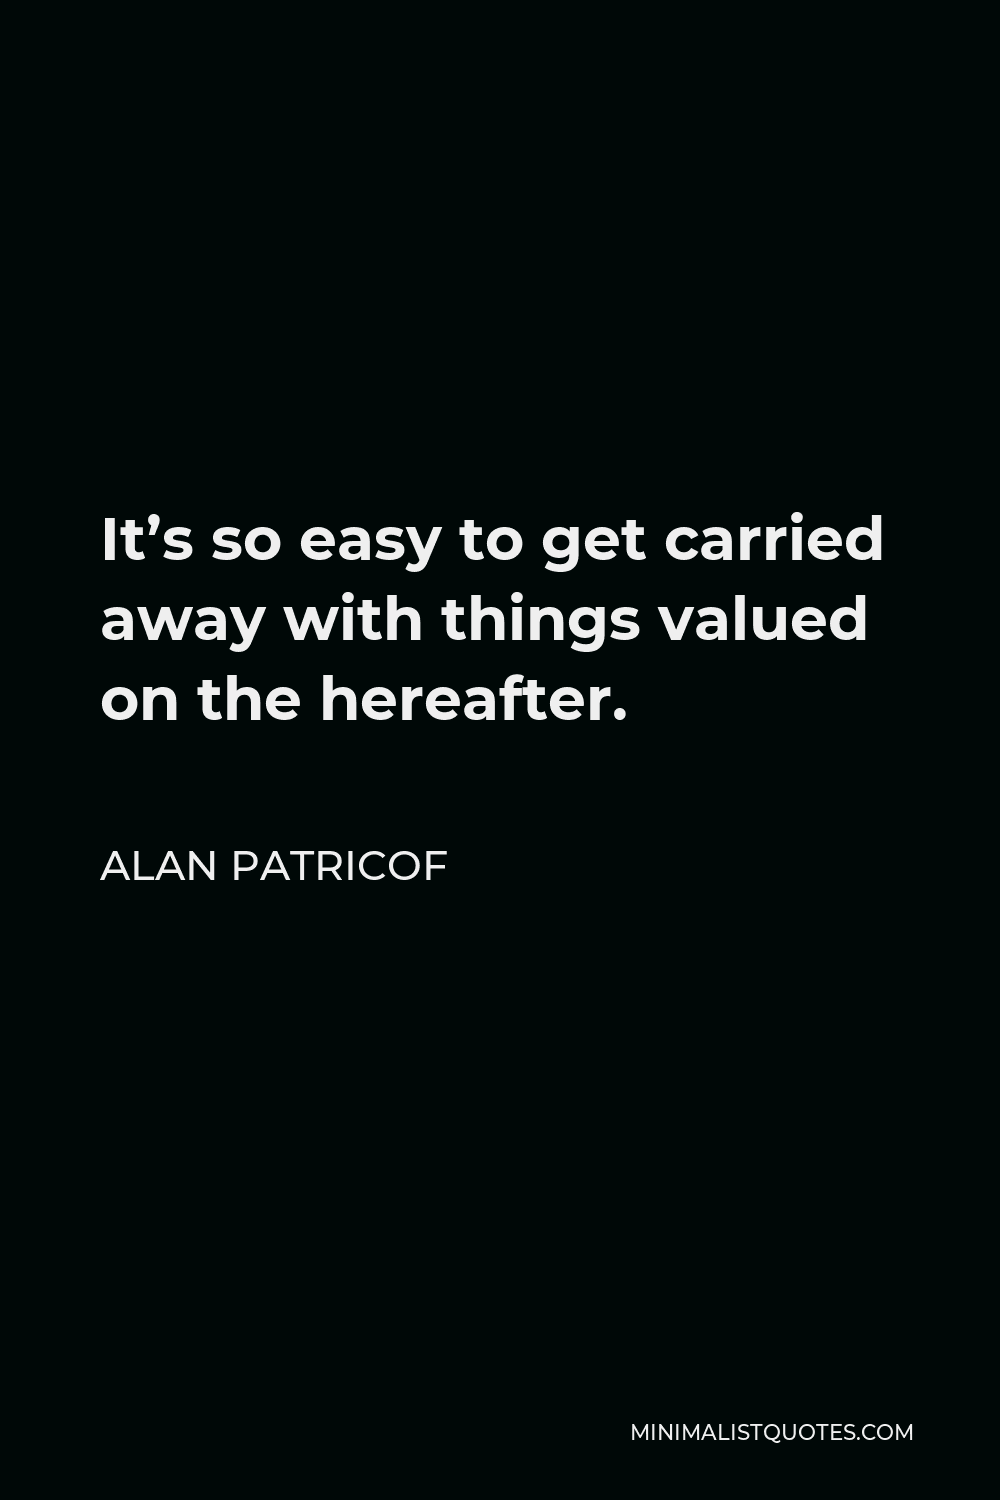 Alan Patricof Quote - It’s so easy to get carried away with things valued on the hereafter.